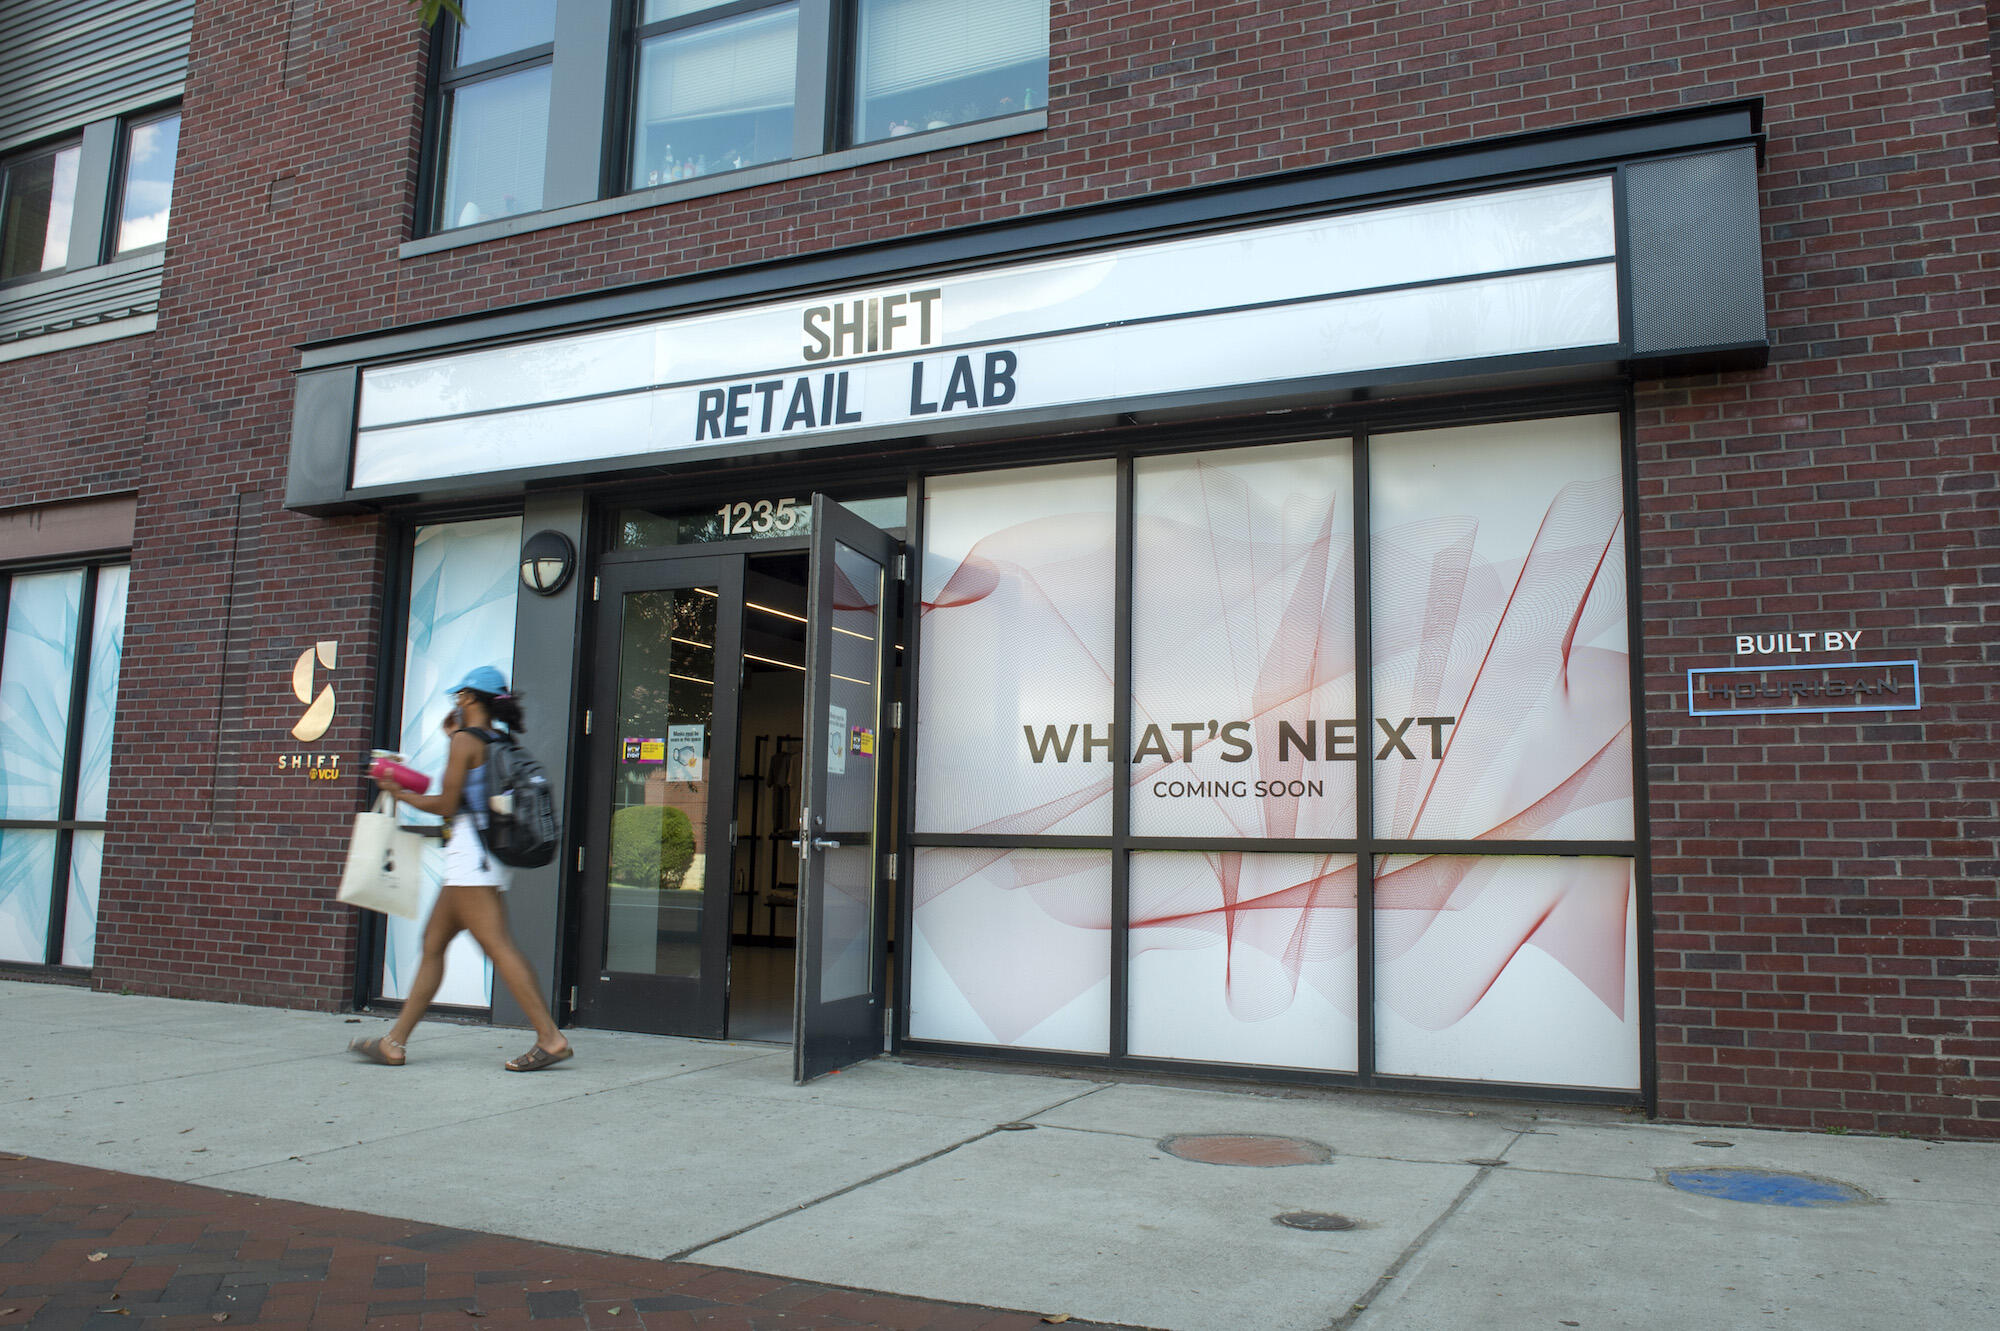 Exterior of Shift Retail Lab at 1235 W. Broad Street